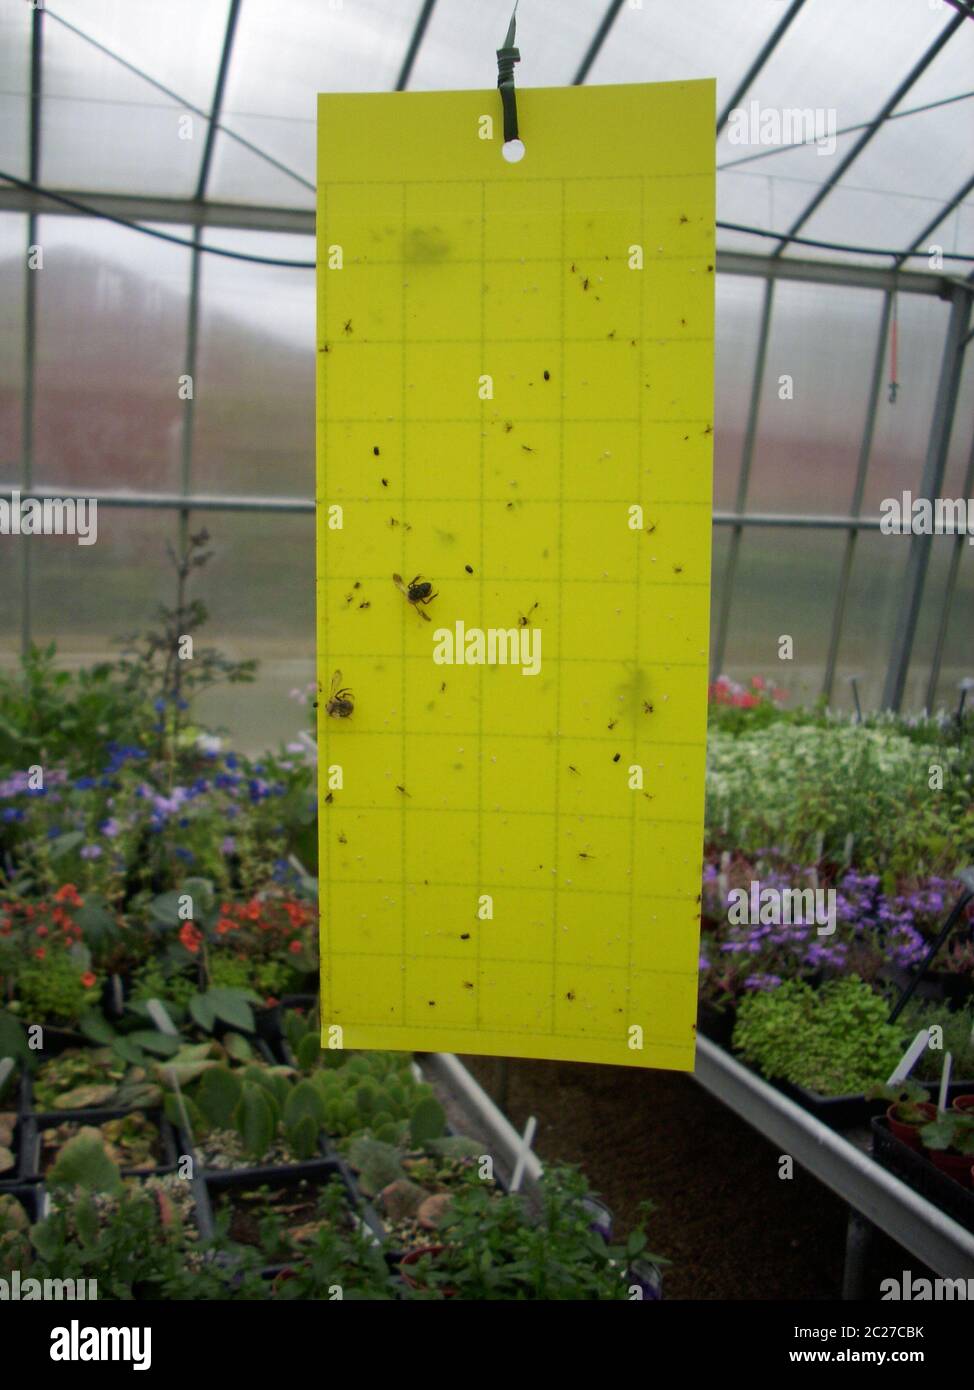 https://c8.alamy.com/comp/2C27CBK/yellow-sticky-fly-paper-trap-for-insects-hanging-from-the-roof-of-a-greenhouse-2C27CBK.jpg